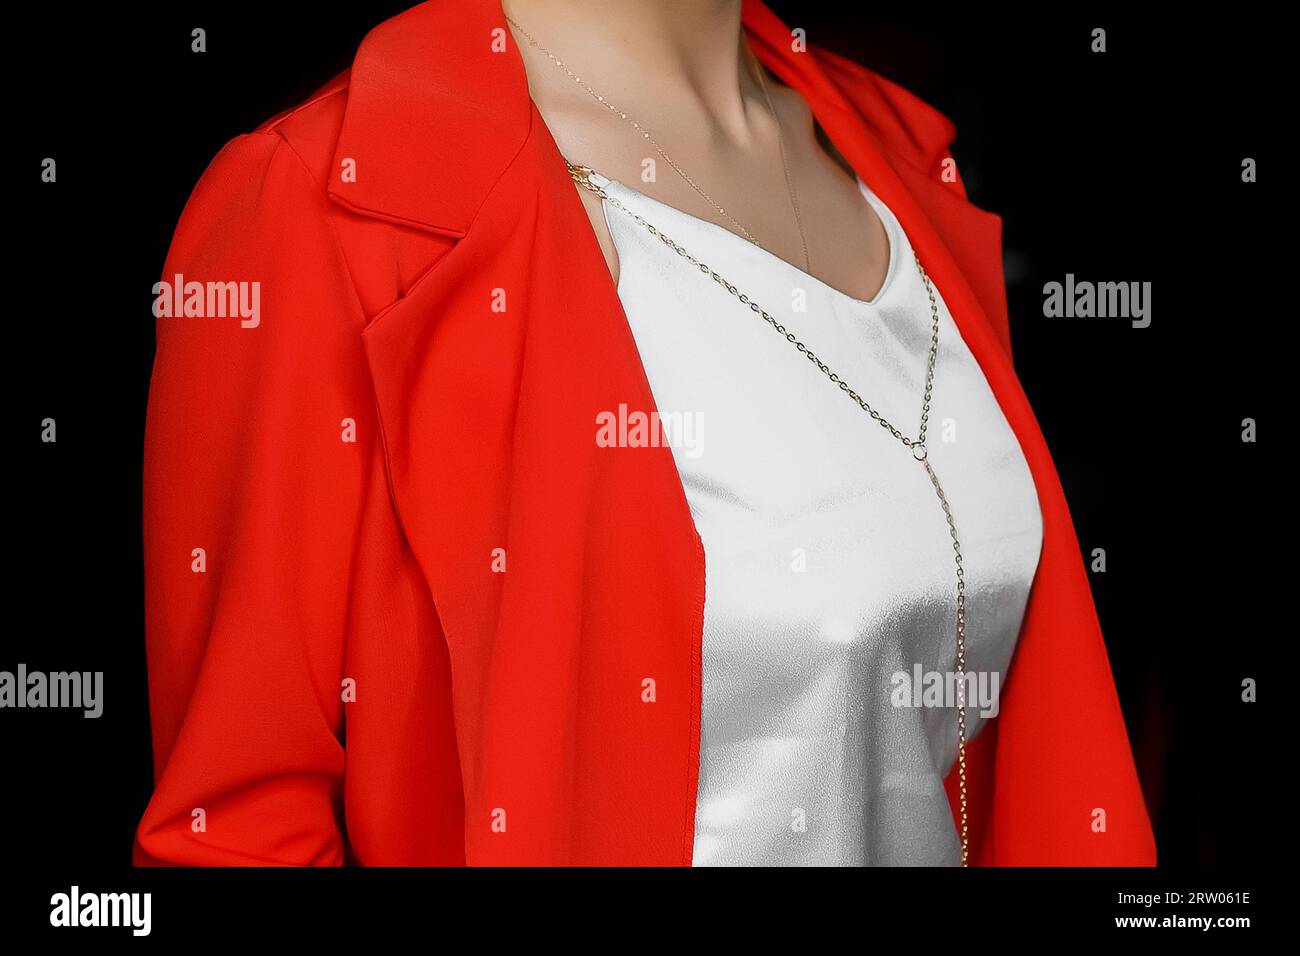 Stylish fashionable girl posing in a white T-shirt and a red jacket on a isolated black background. Stock Photo